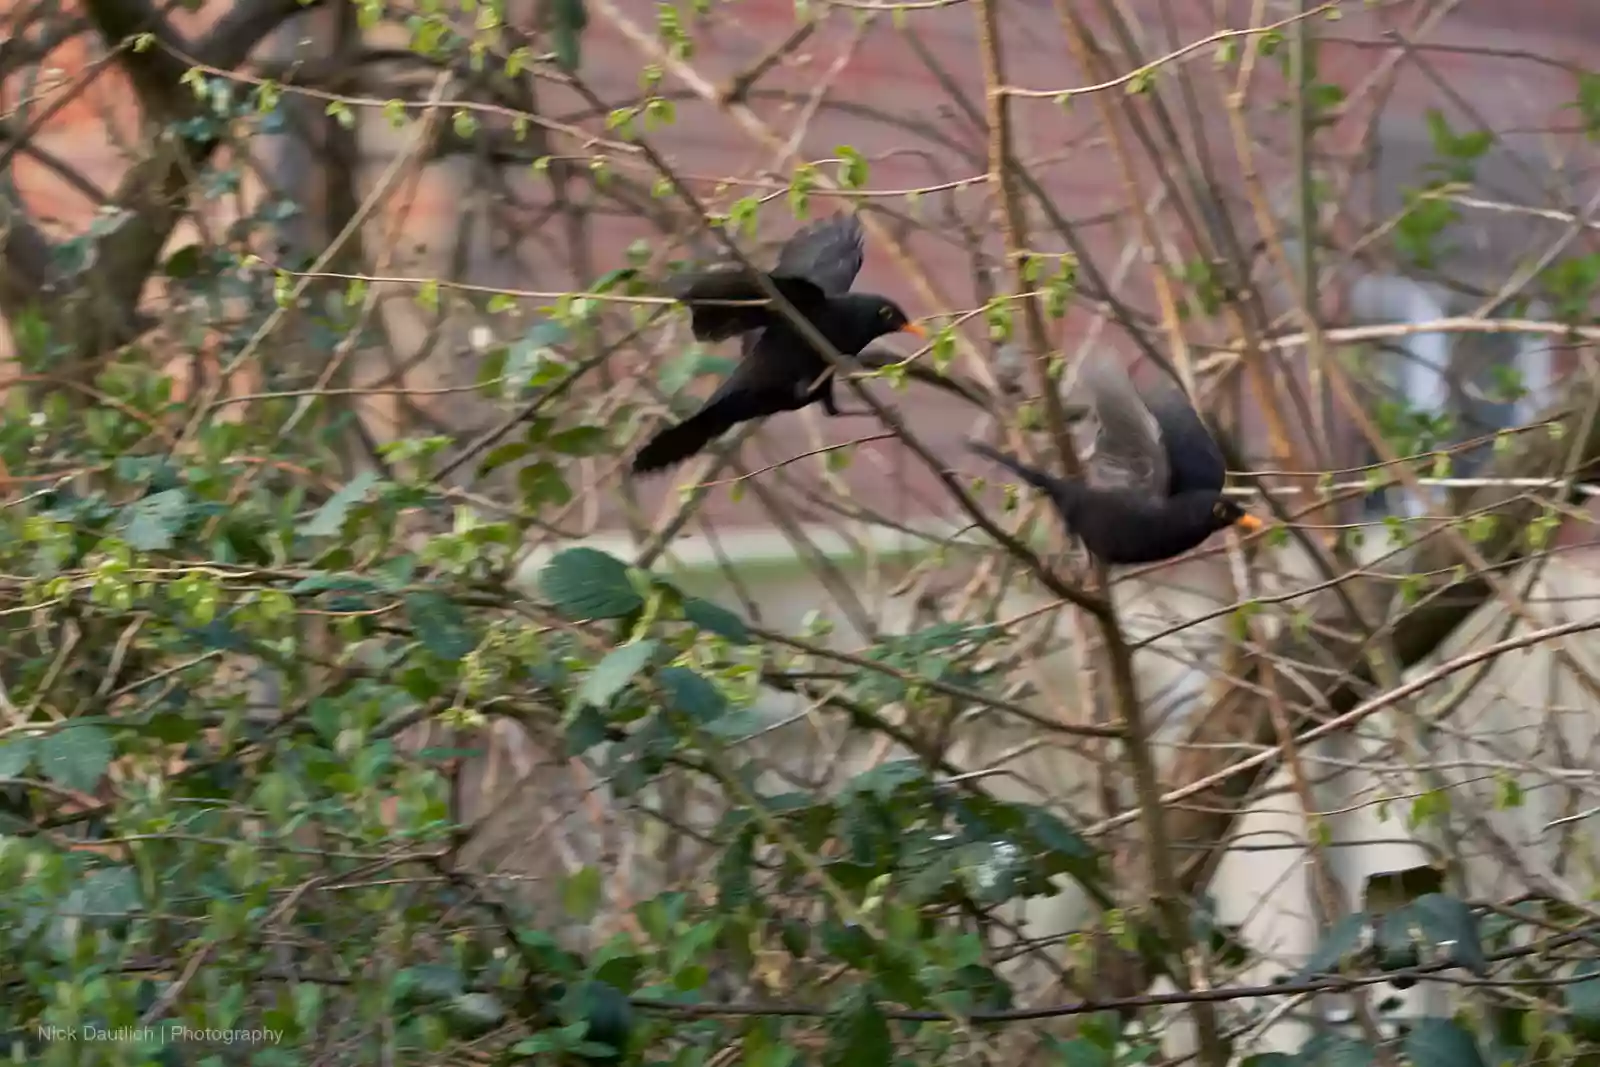 Blackbirds out of focus - too slow shutter speed